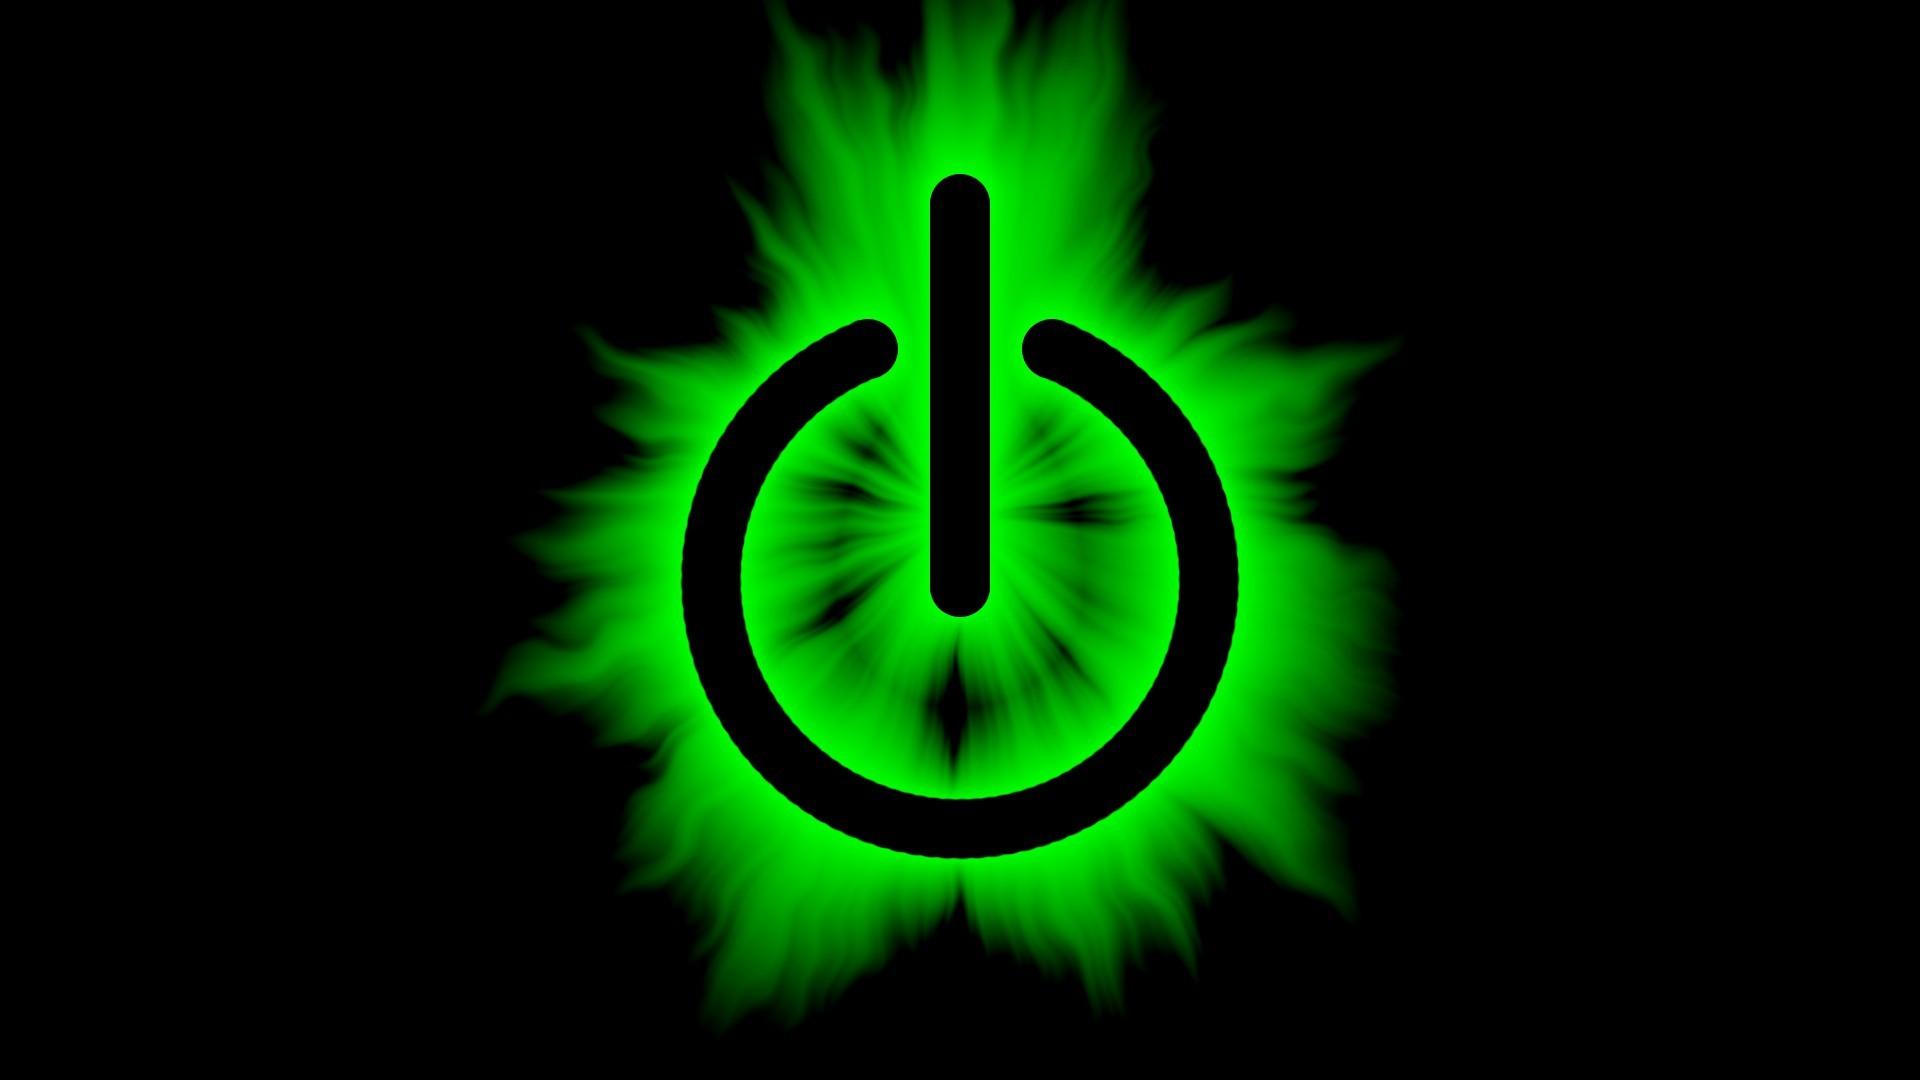 Symbol power button effects switch wallpaper | (109873)